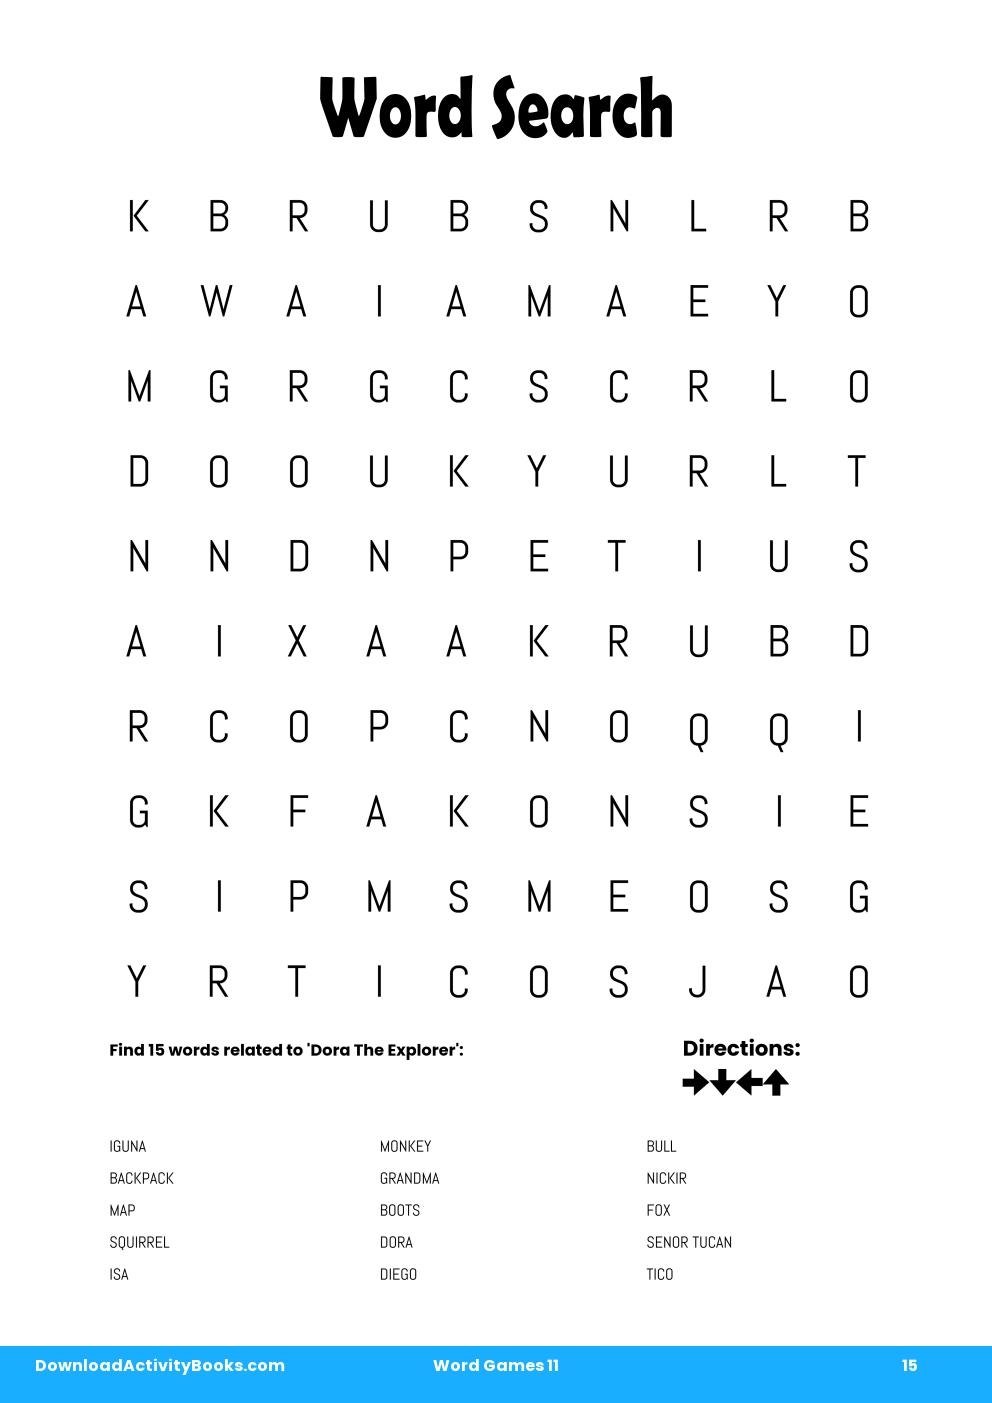 Word Search in Word Games 11